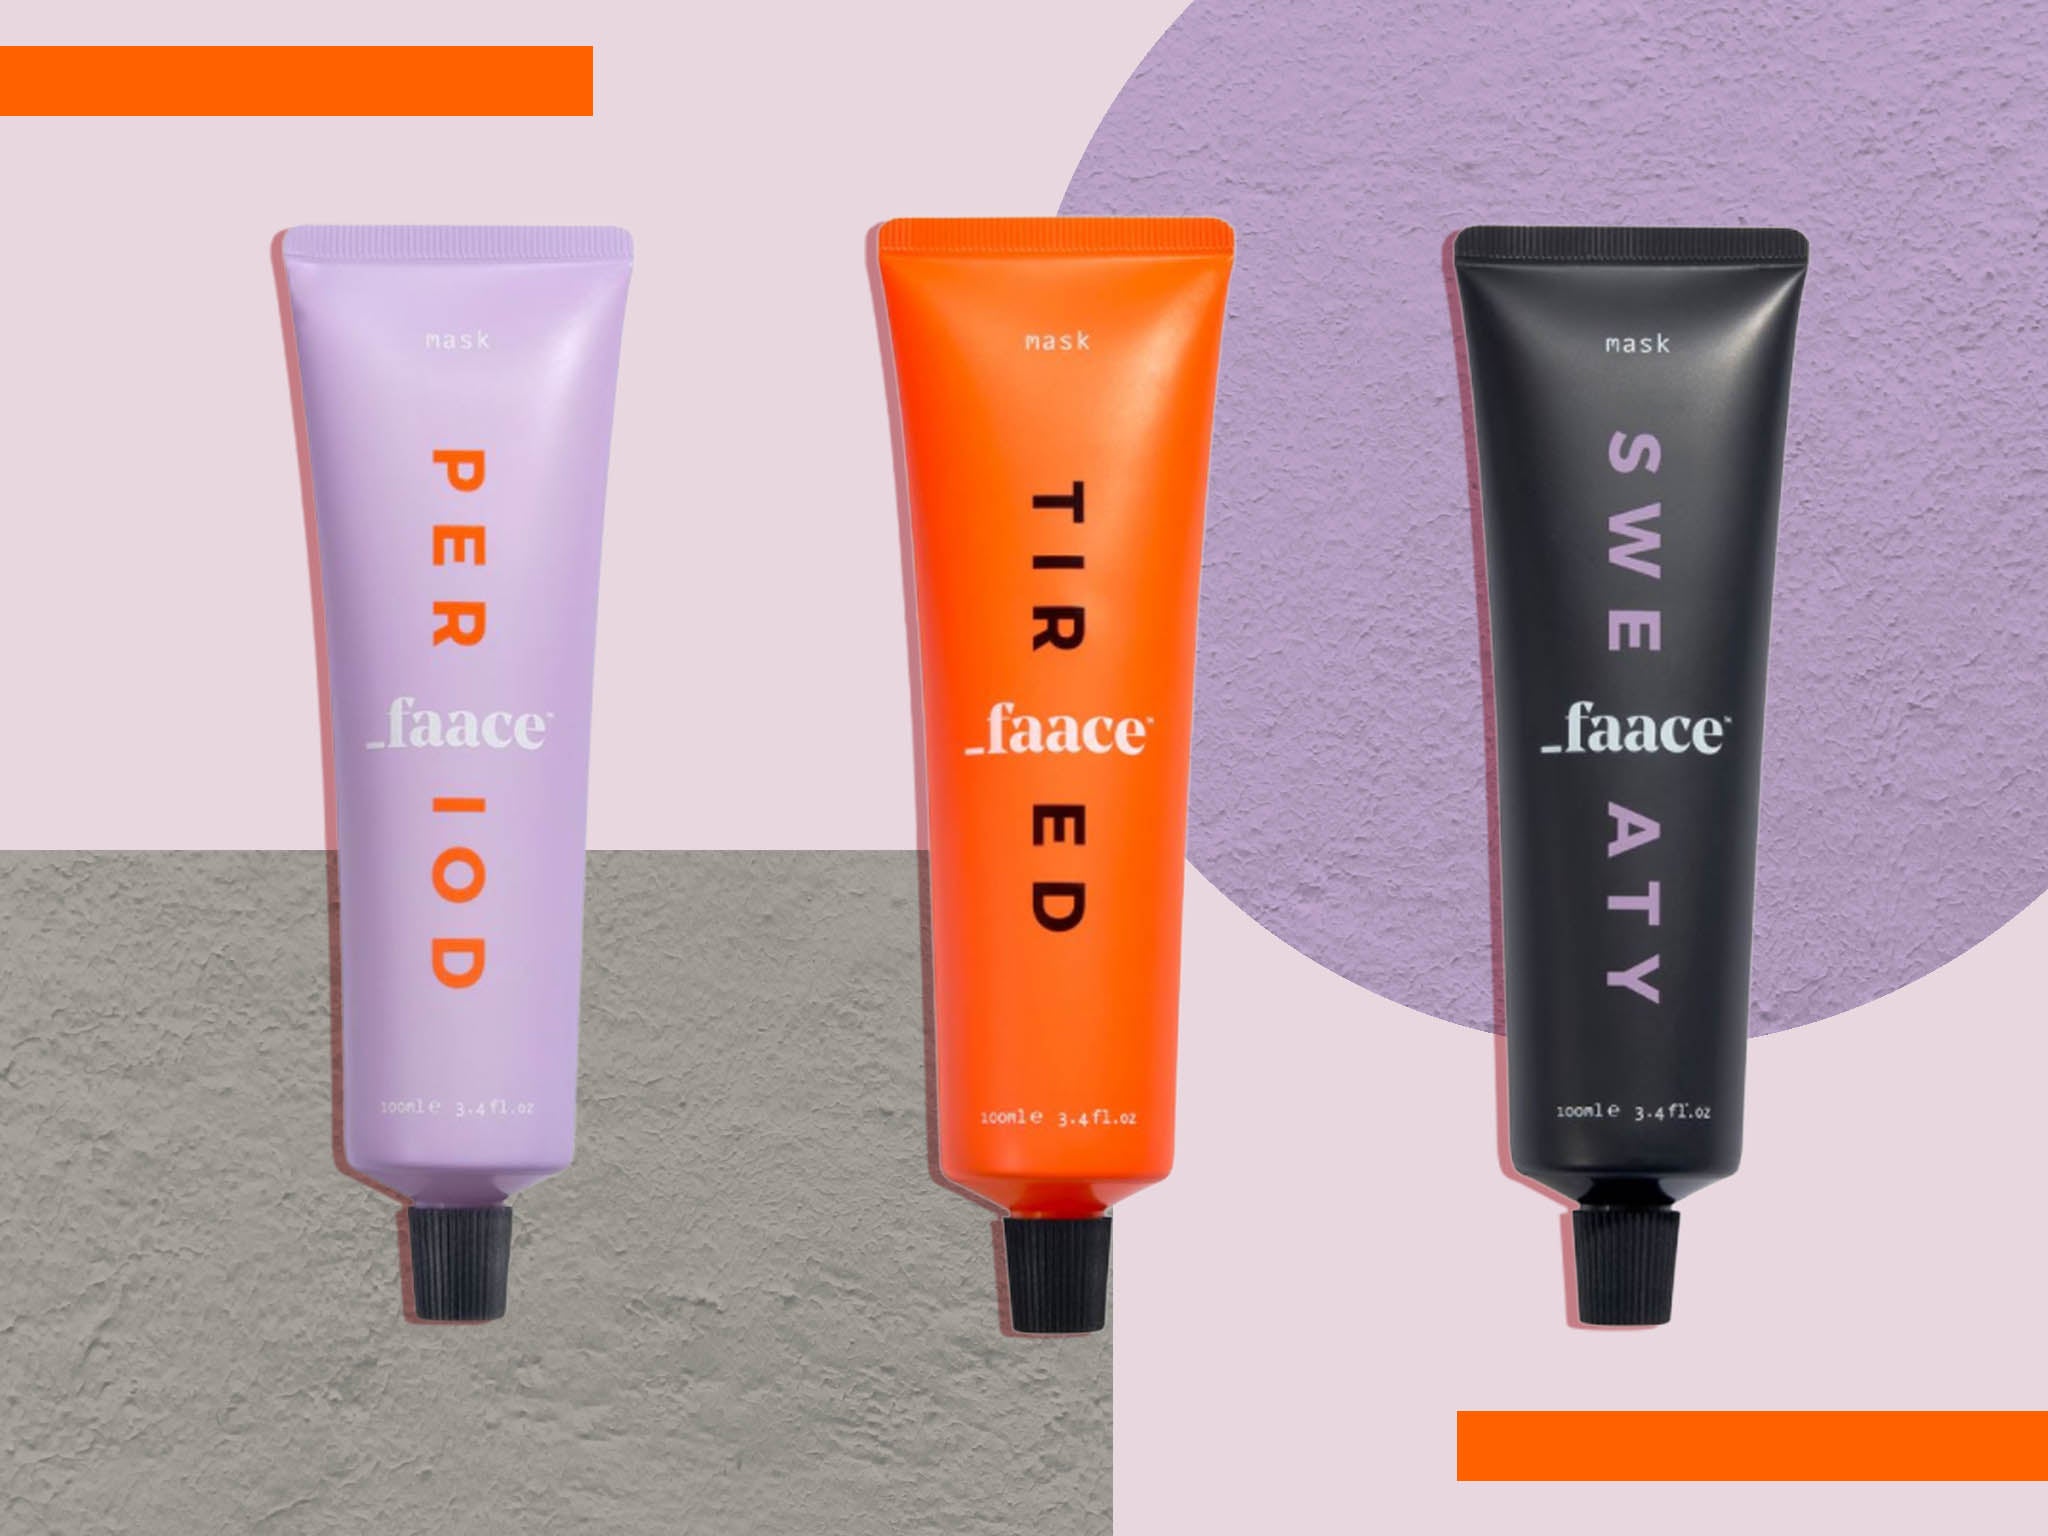 Faace’s fuss-free face masks took the confusion out of my skincare regime